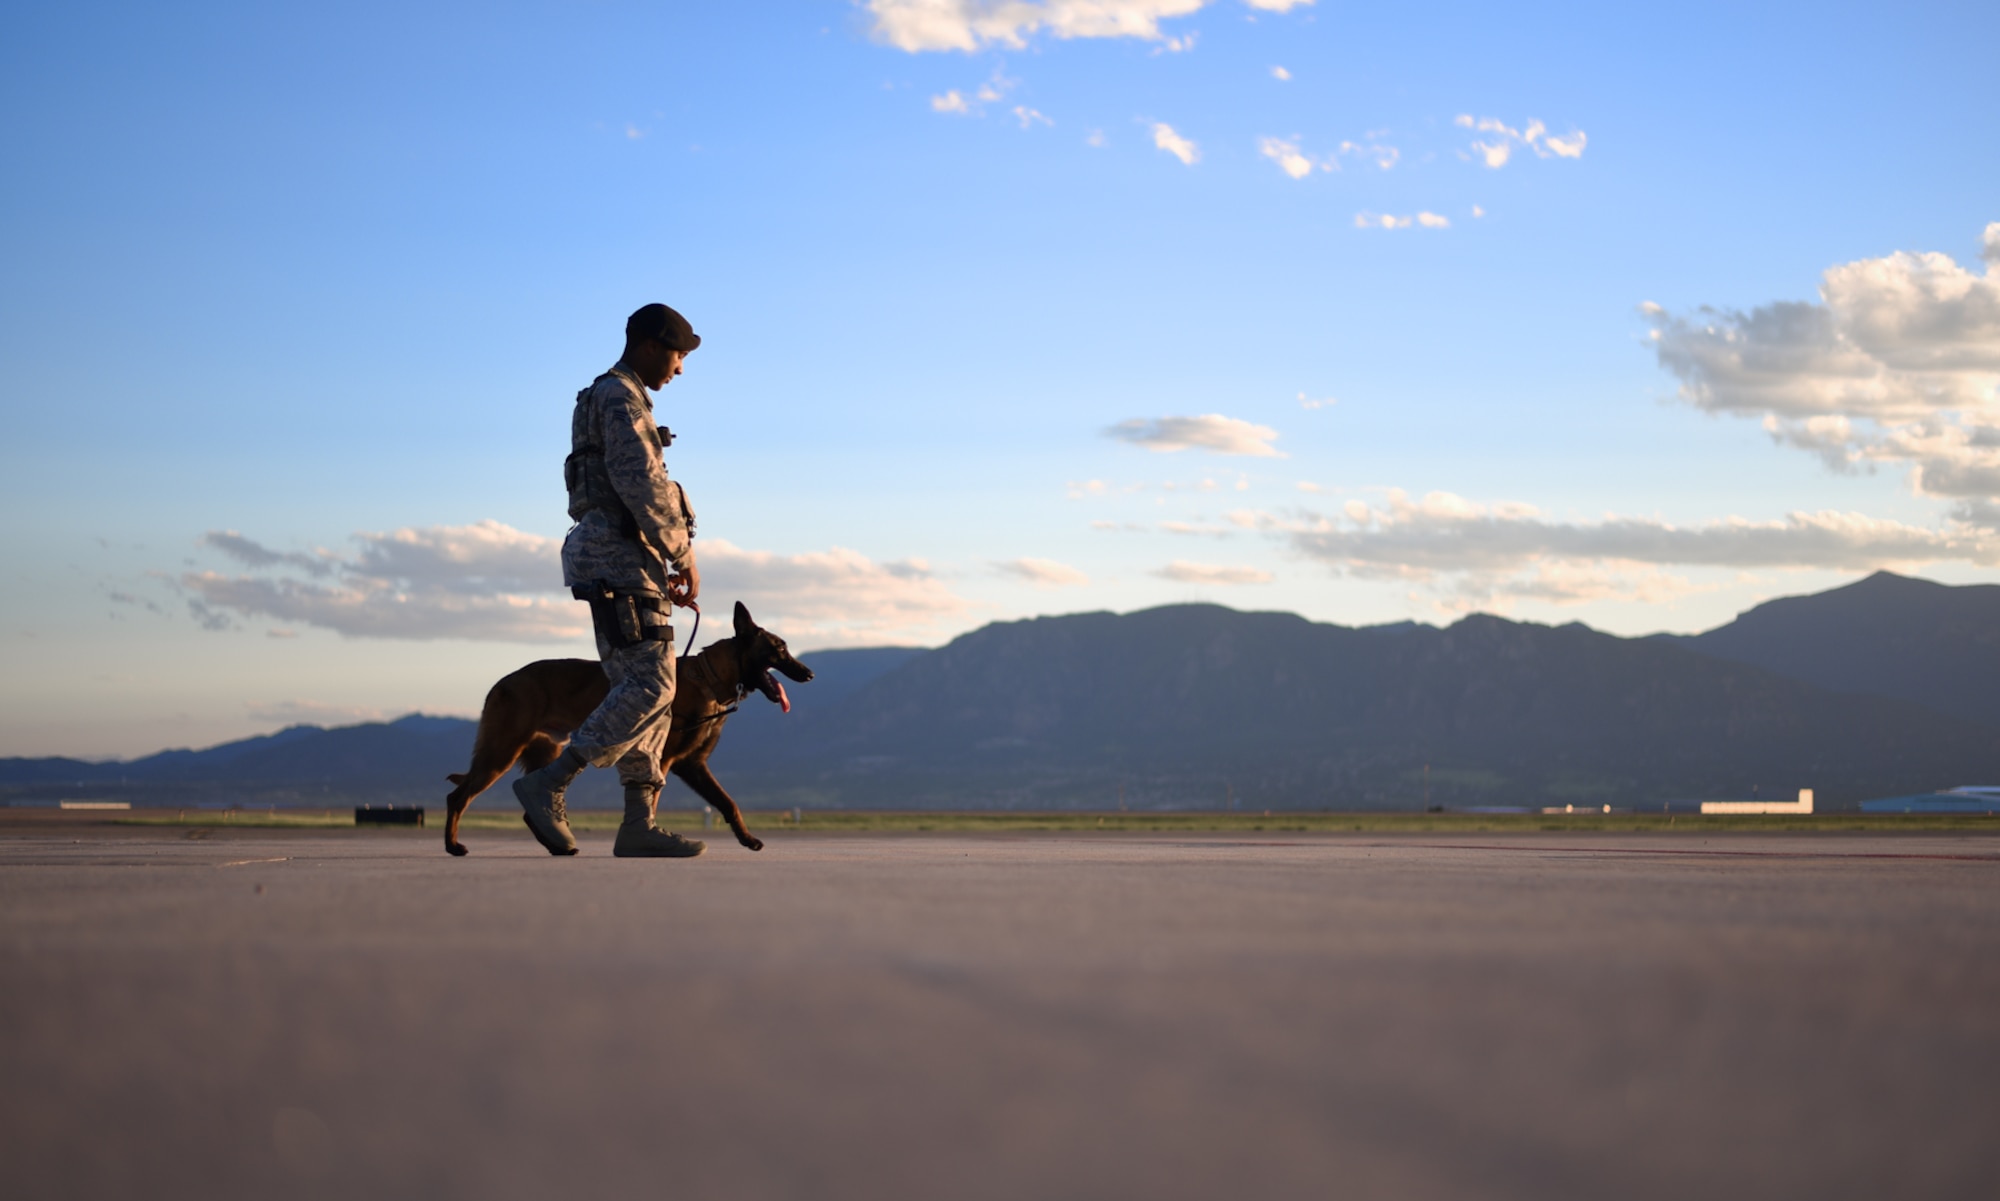 Senior Airman Tariq Russell, 21st Security Forces Squadron military working dog handler, and his partner, Ppaul, walk the flight line at Peterson Air Force Base, Colo., June 14, 2016. Along with detection, Ppaul can be used for suspect apprehension and search and rescue missions. (U.S. Air Force photo by Airman 1st Class Dennis Hoffman)